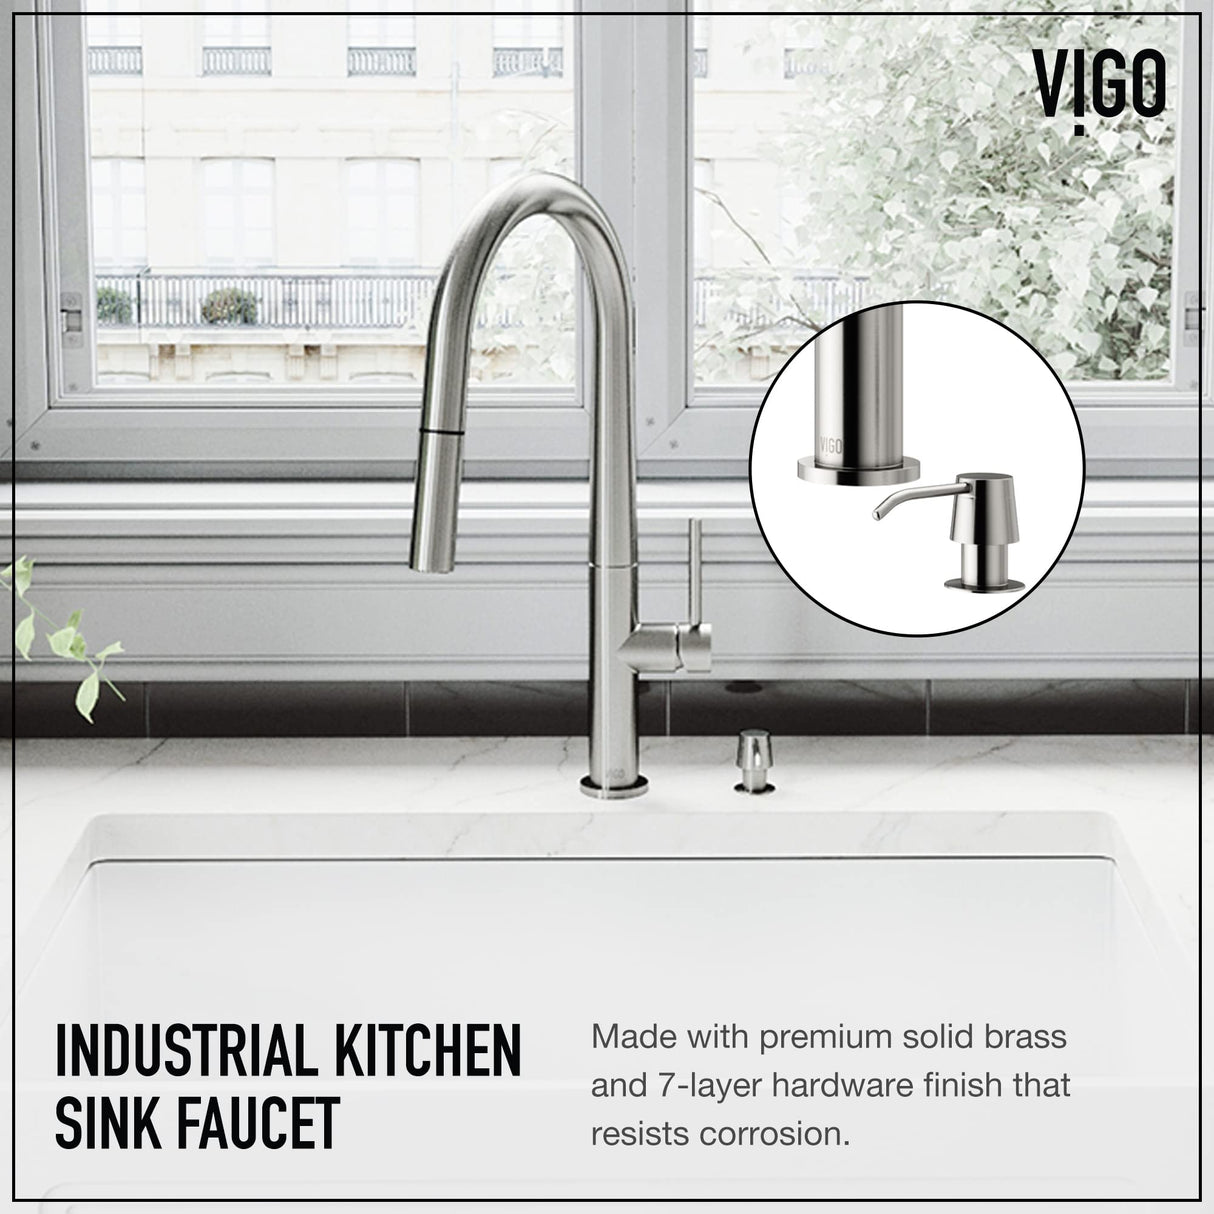 VIGO Greenwich Stainless Steel Kitchen Faucet with Pull-Down Sprayer | Solid Brass Faucet for Kitchen Sink with Soap Dispenser | Single-Handle Kitchen Sink Faucet with Dual Functioning Sink Sprayer